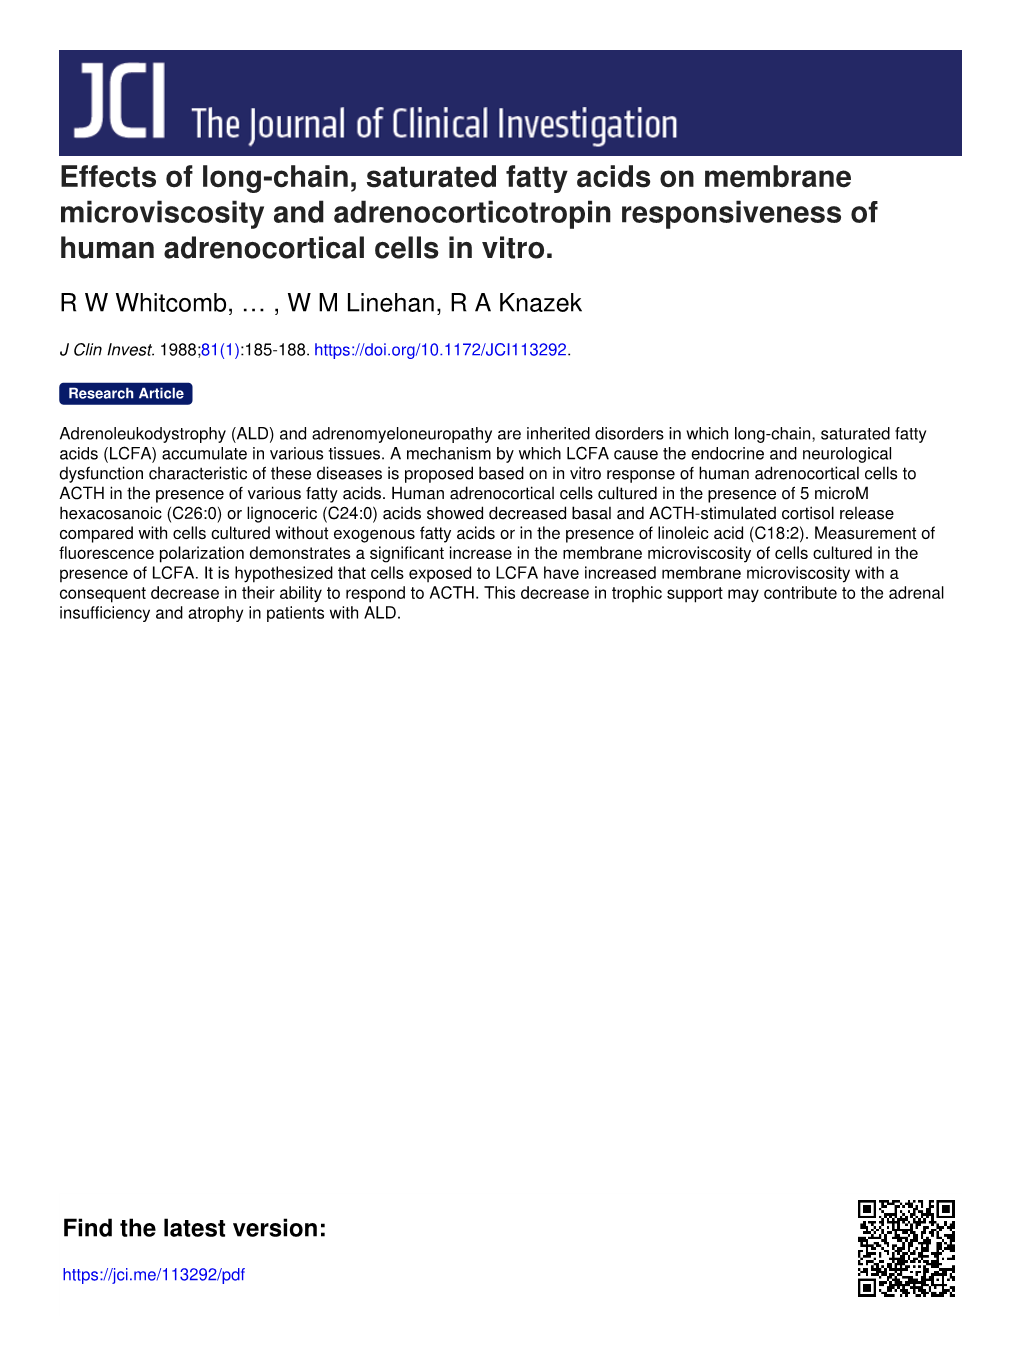 Effects of Long-Chain, Saturated Fatty Acids on Membrane Microviscosity and Adrenocorticotropin Responsiveness of Human Adrenocortical Cells in Vitro